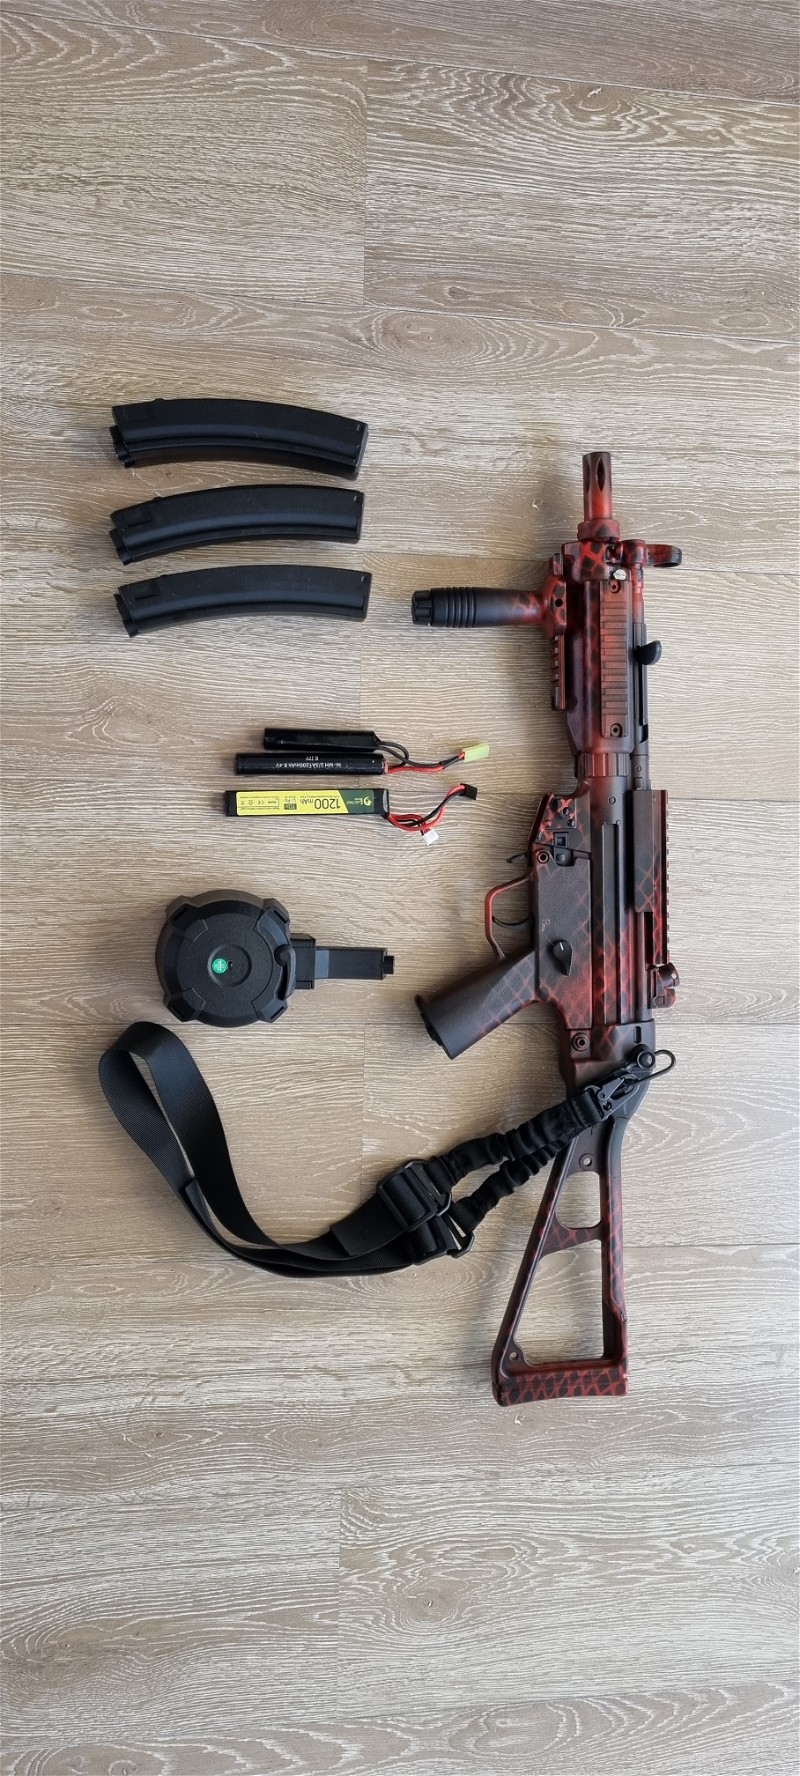 Image 1 for Airsoft replica + extra's